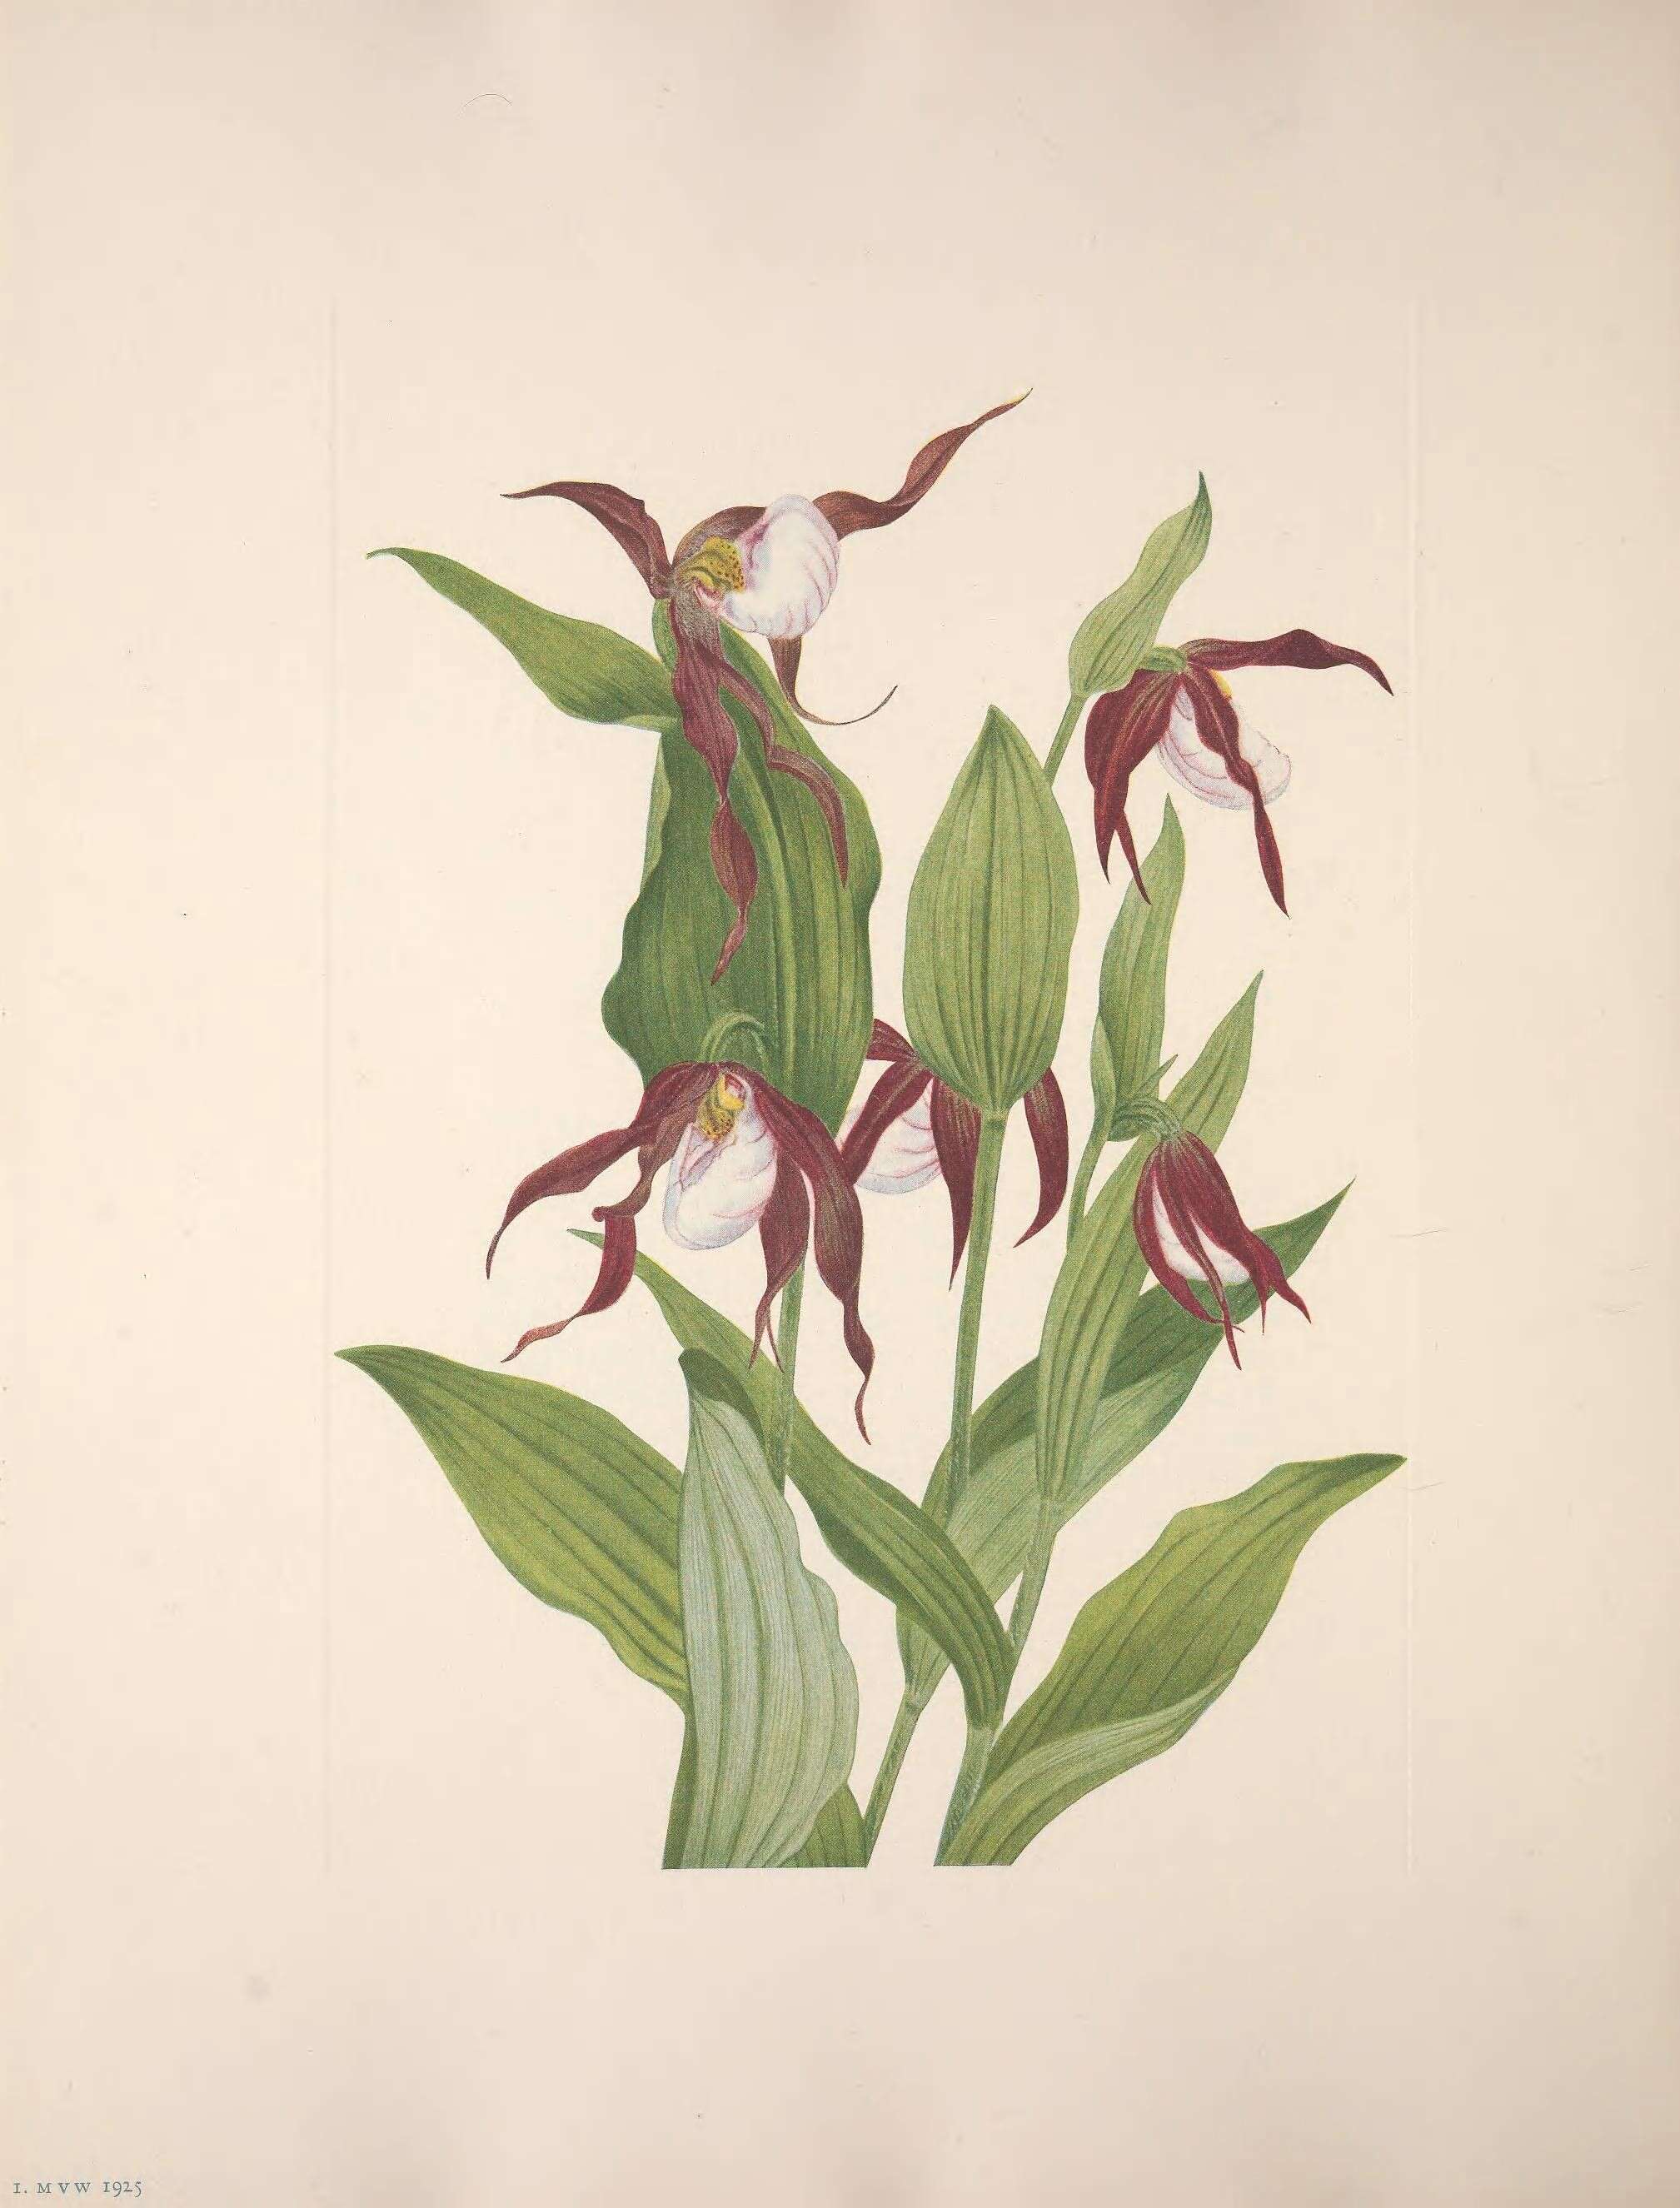 Image of Mountain lady's slipper